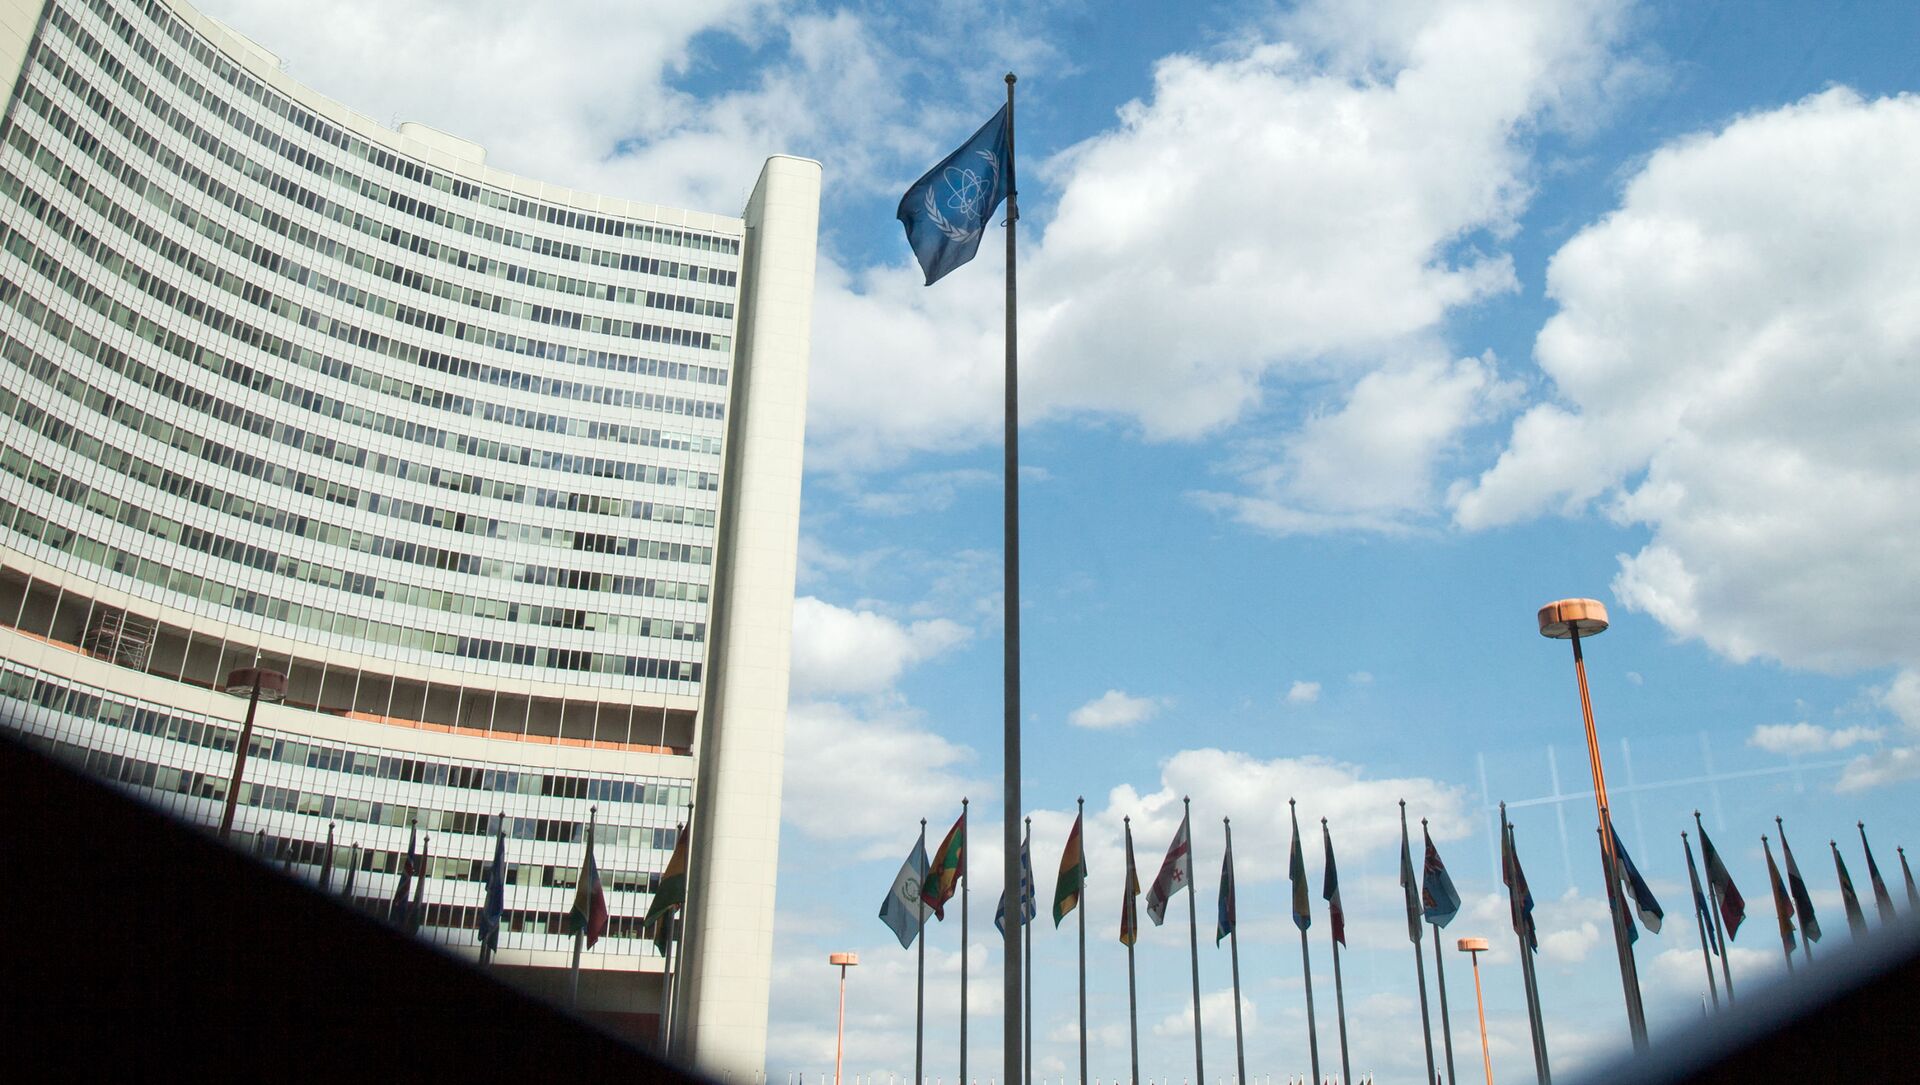 The flag of the International Atomic Energy Agency (IAEA) flutters in front of the IAEA building in Vienna on July 10, 2019. - The UN's nuclear watchdog will hold a special meeting on Iran's nuclear programme, after Tehran breached one of the limits set in a 2015 deal with world powers. - Sputnik International, 1920, 20.02.2021